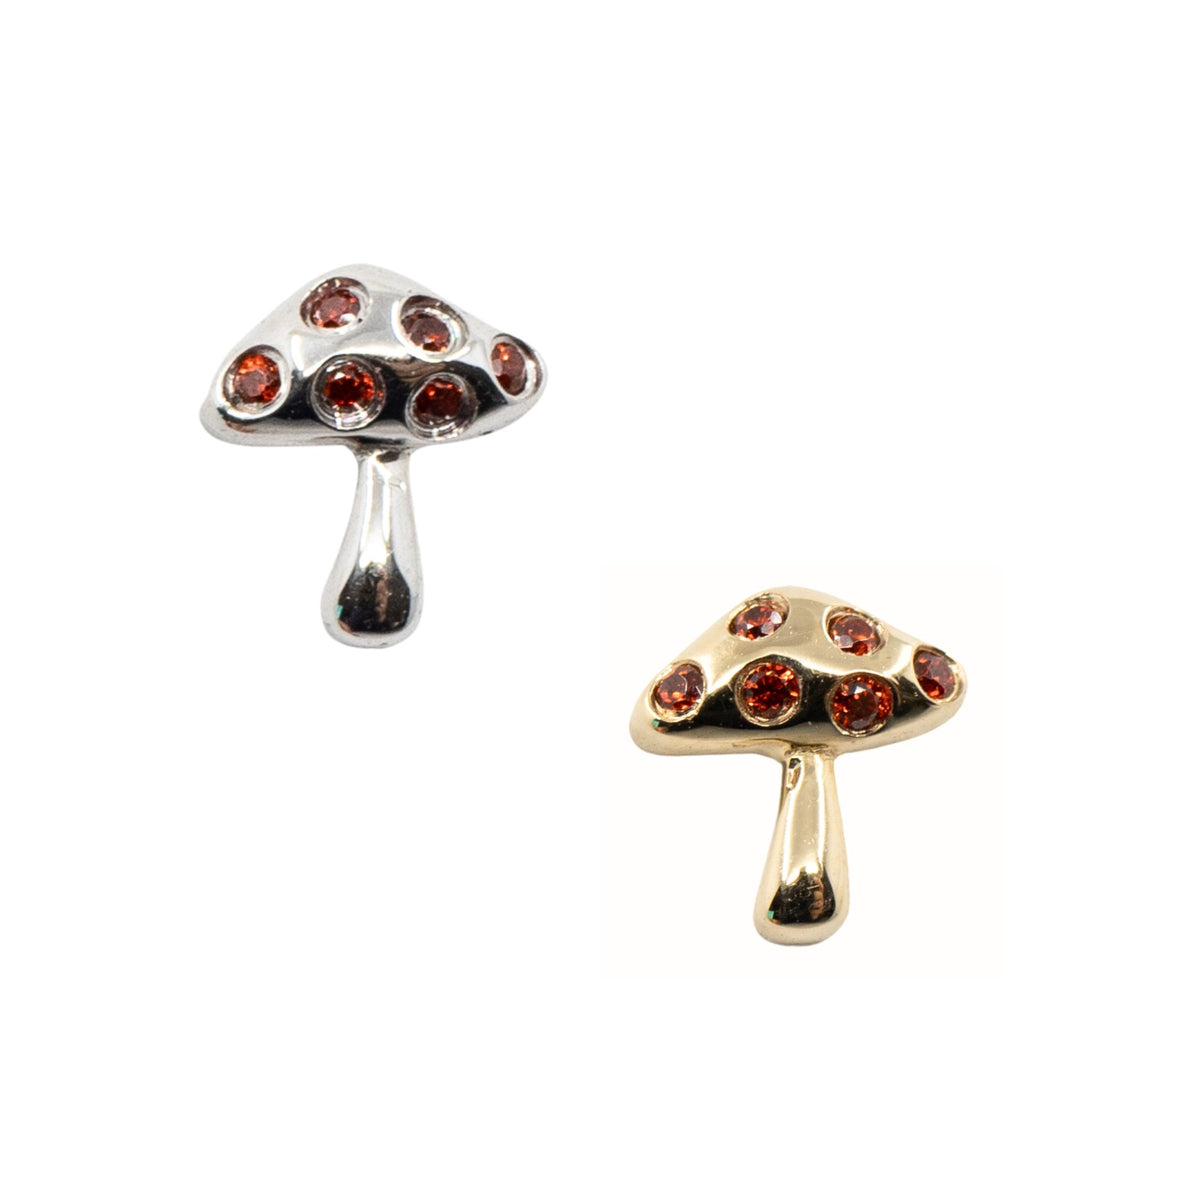 Yellow Gold Studs Mushroom Earring The Curated Lobe14k gold14k gold topcartilage